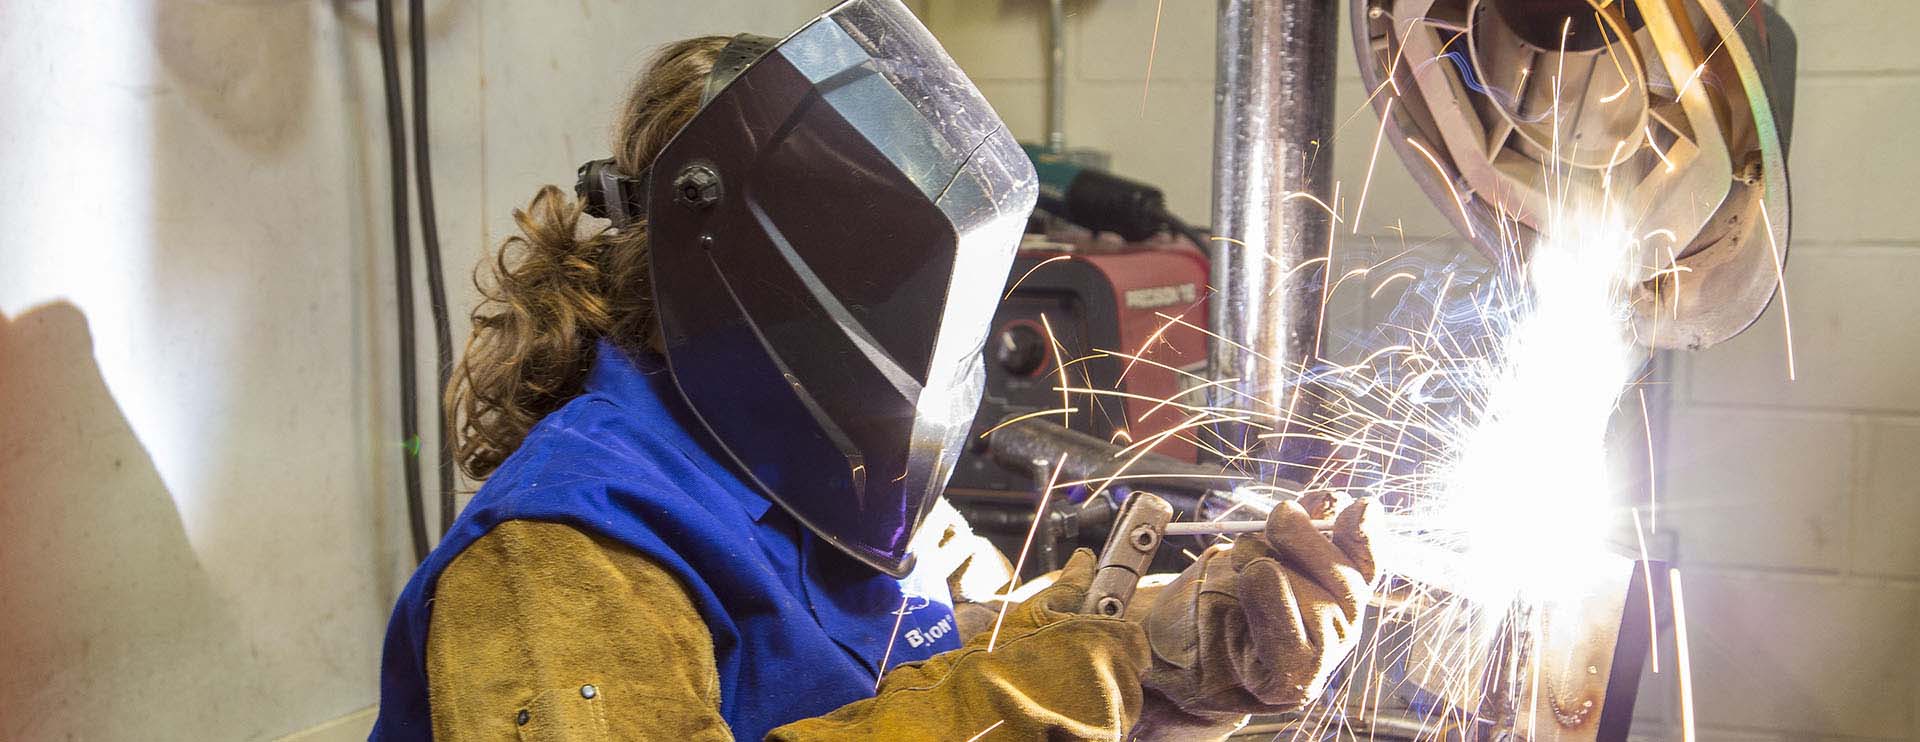 Welding student at Northern Wyoming Community College